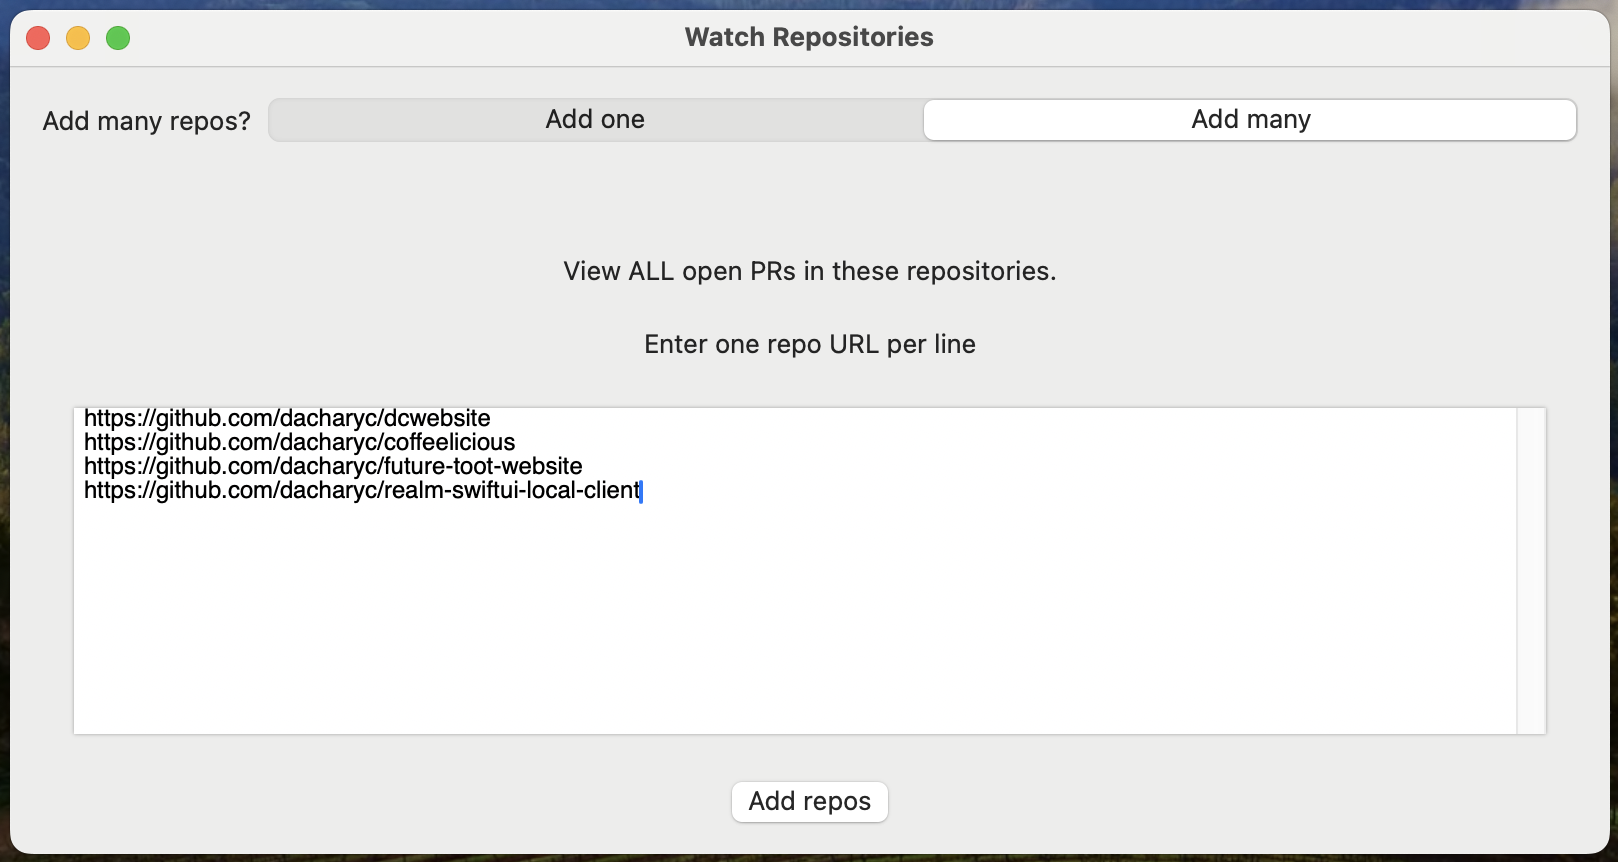 Screenshot showing the Watch Repository pane, with <code>Add Many</code> selected and a text box to enter many repository URLs